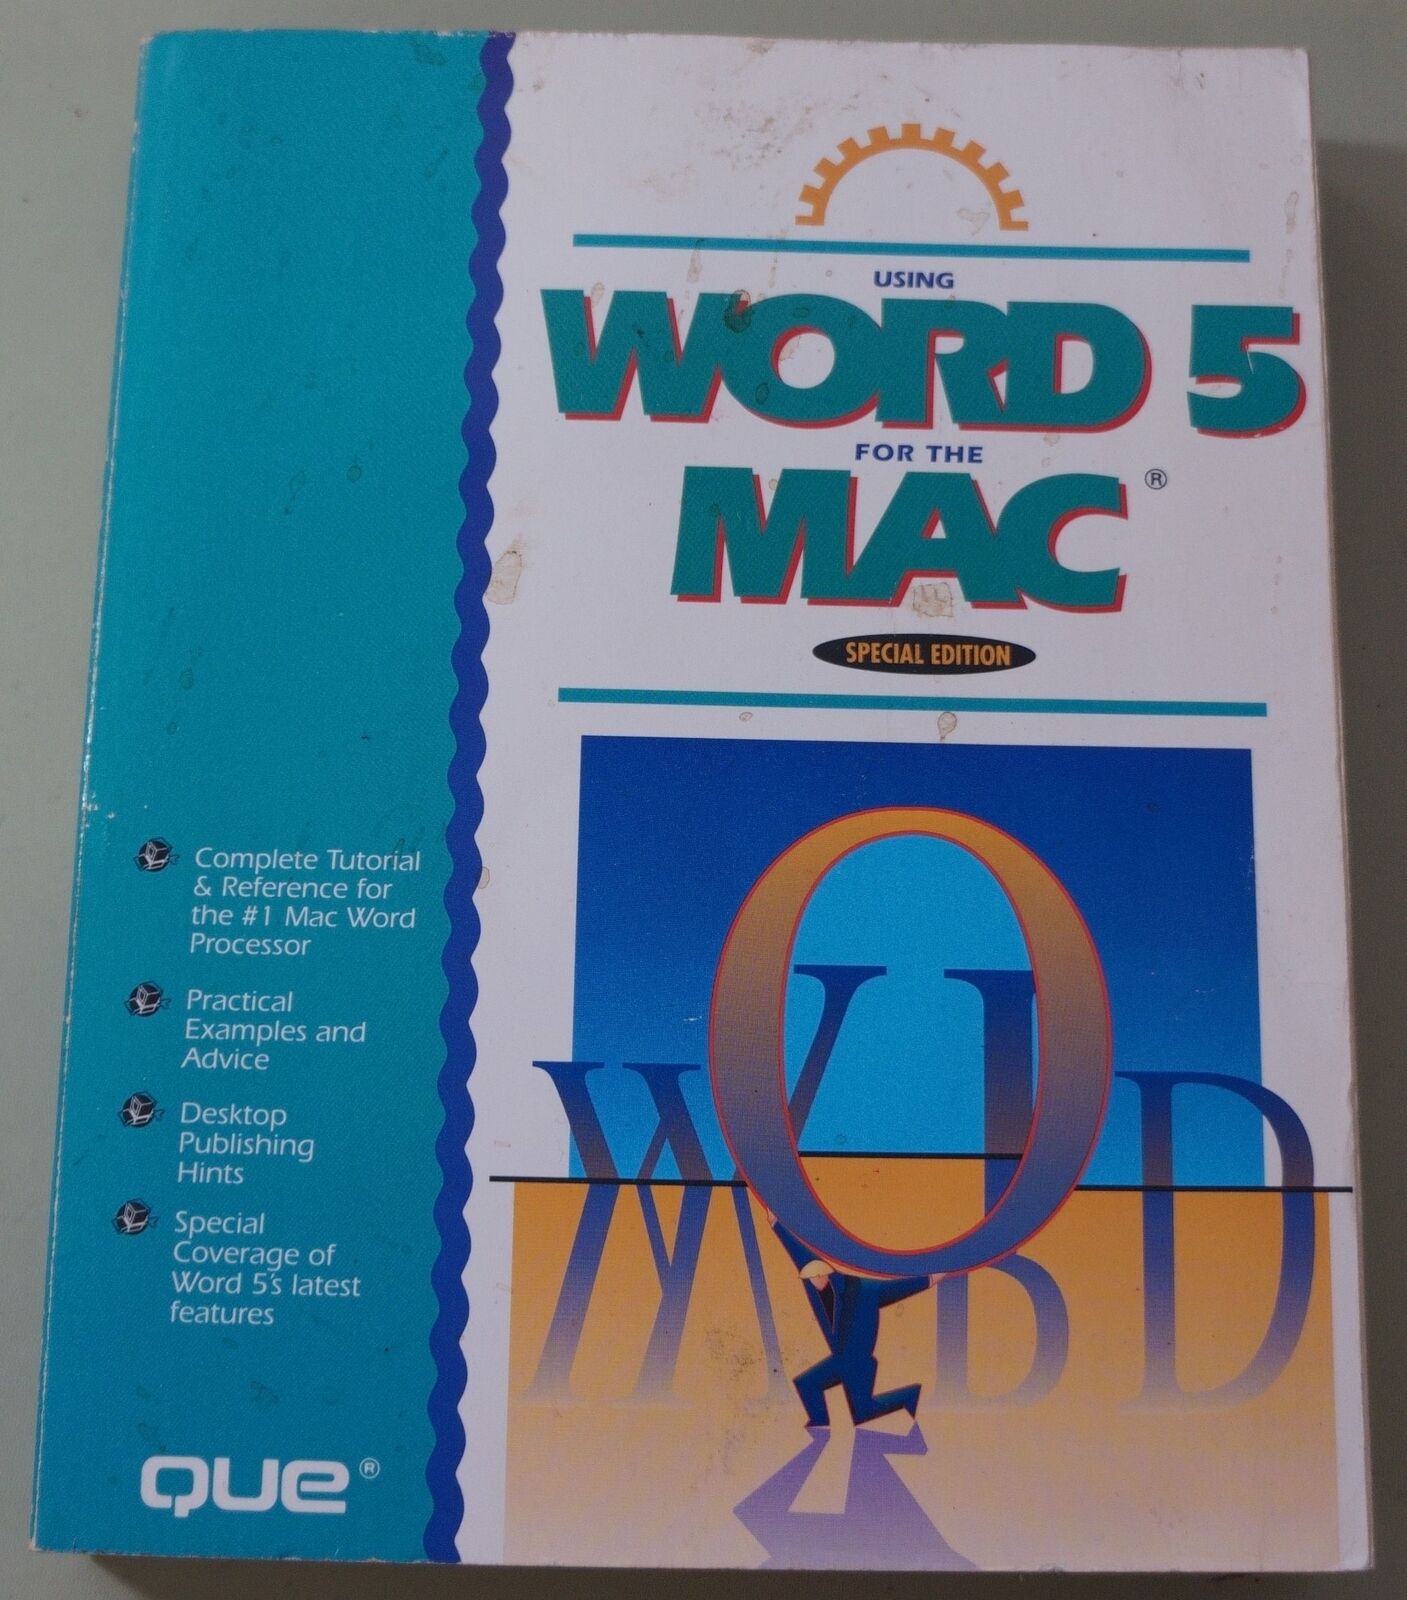 Using Word 5 For The Mac - Special Edition - Bryan Pfaffenberger- Que Publishing